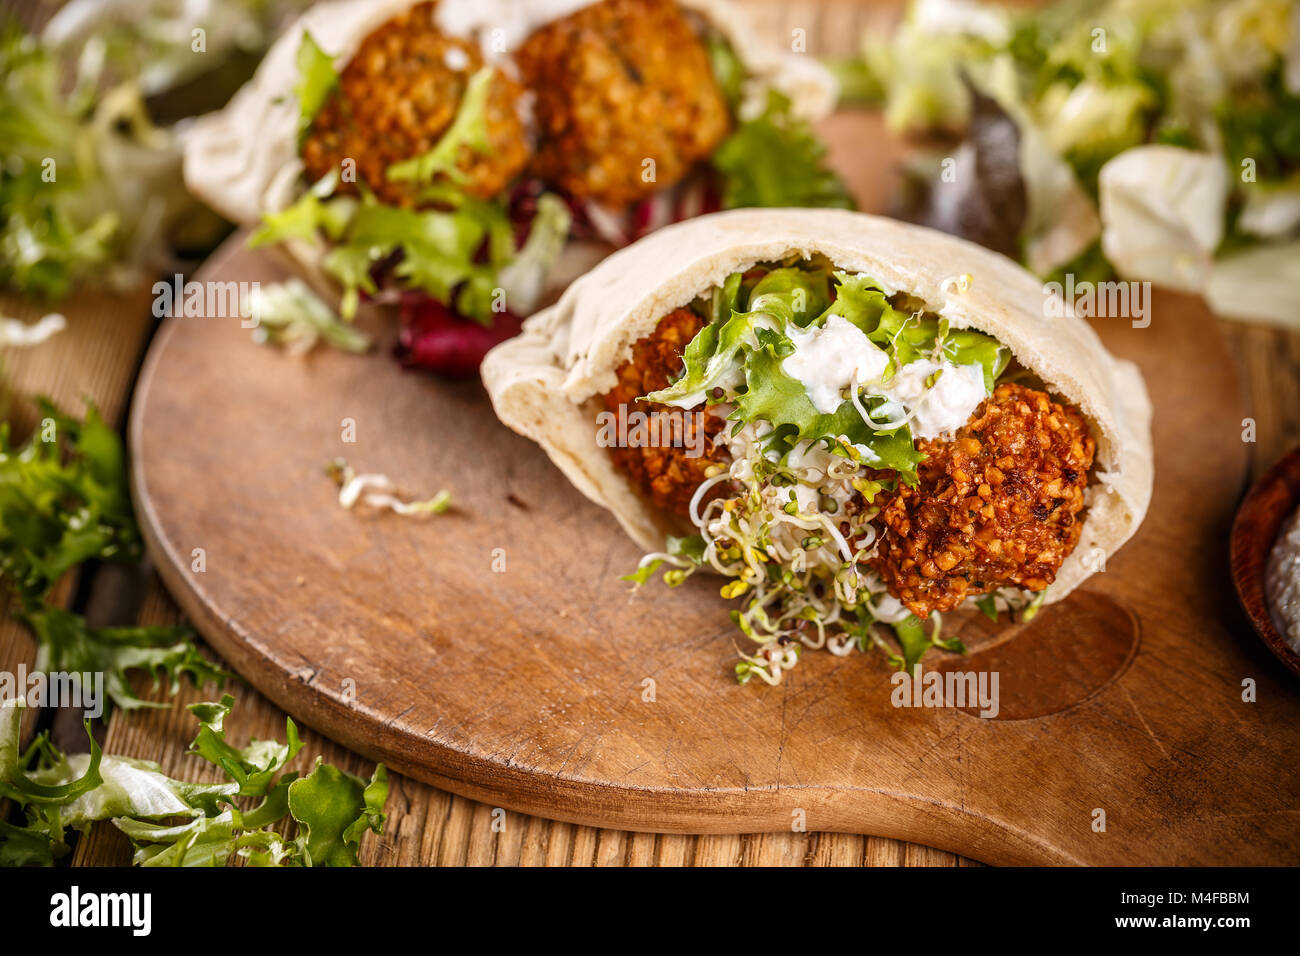 Falafel balls, pita-arabian bread and fresh vegetables on a wooden background Stock Photo